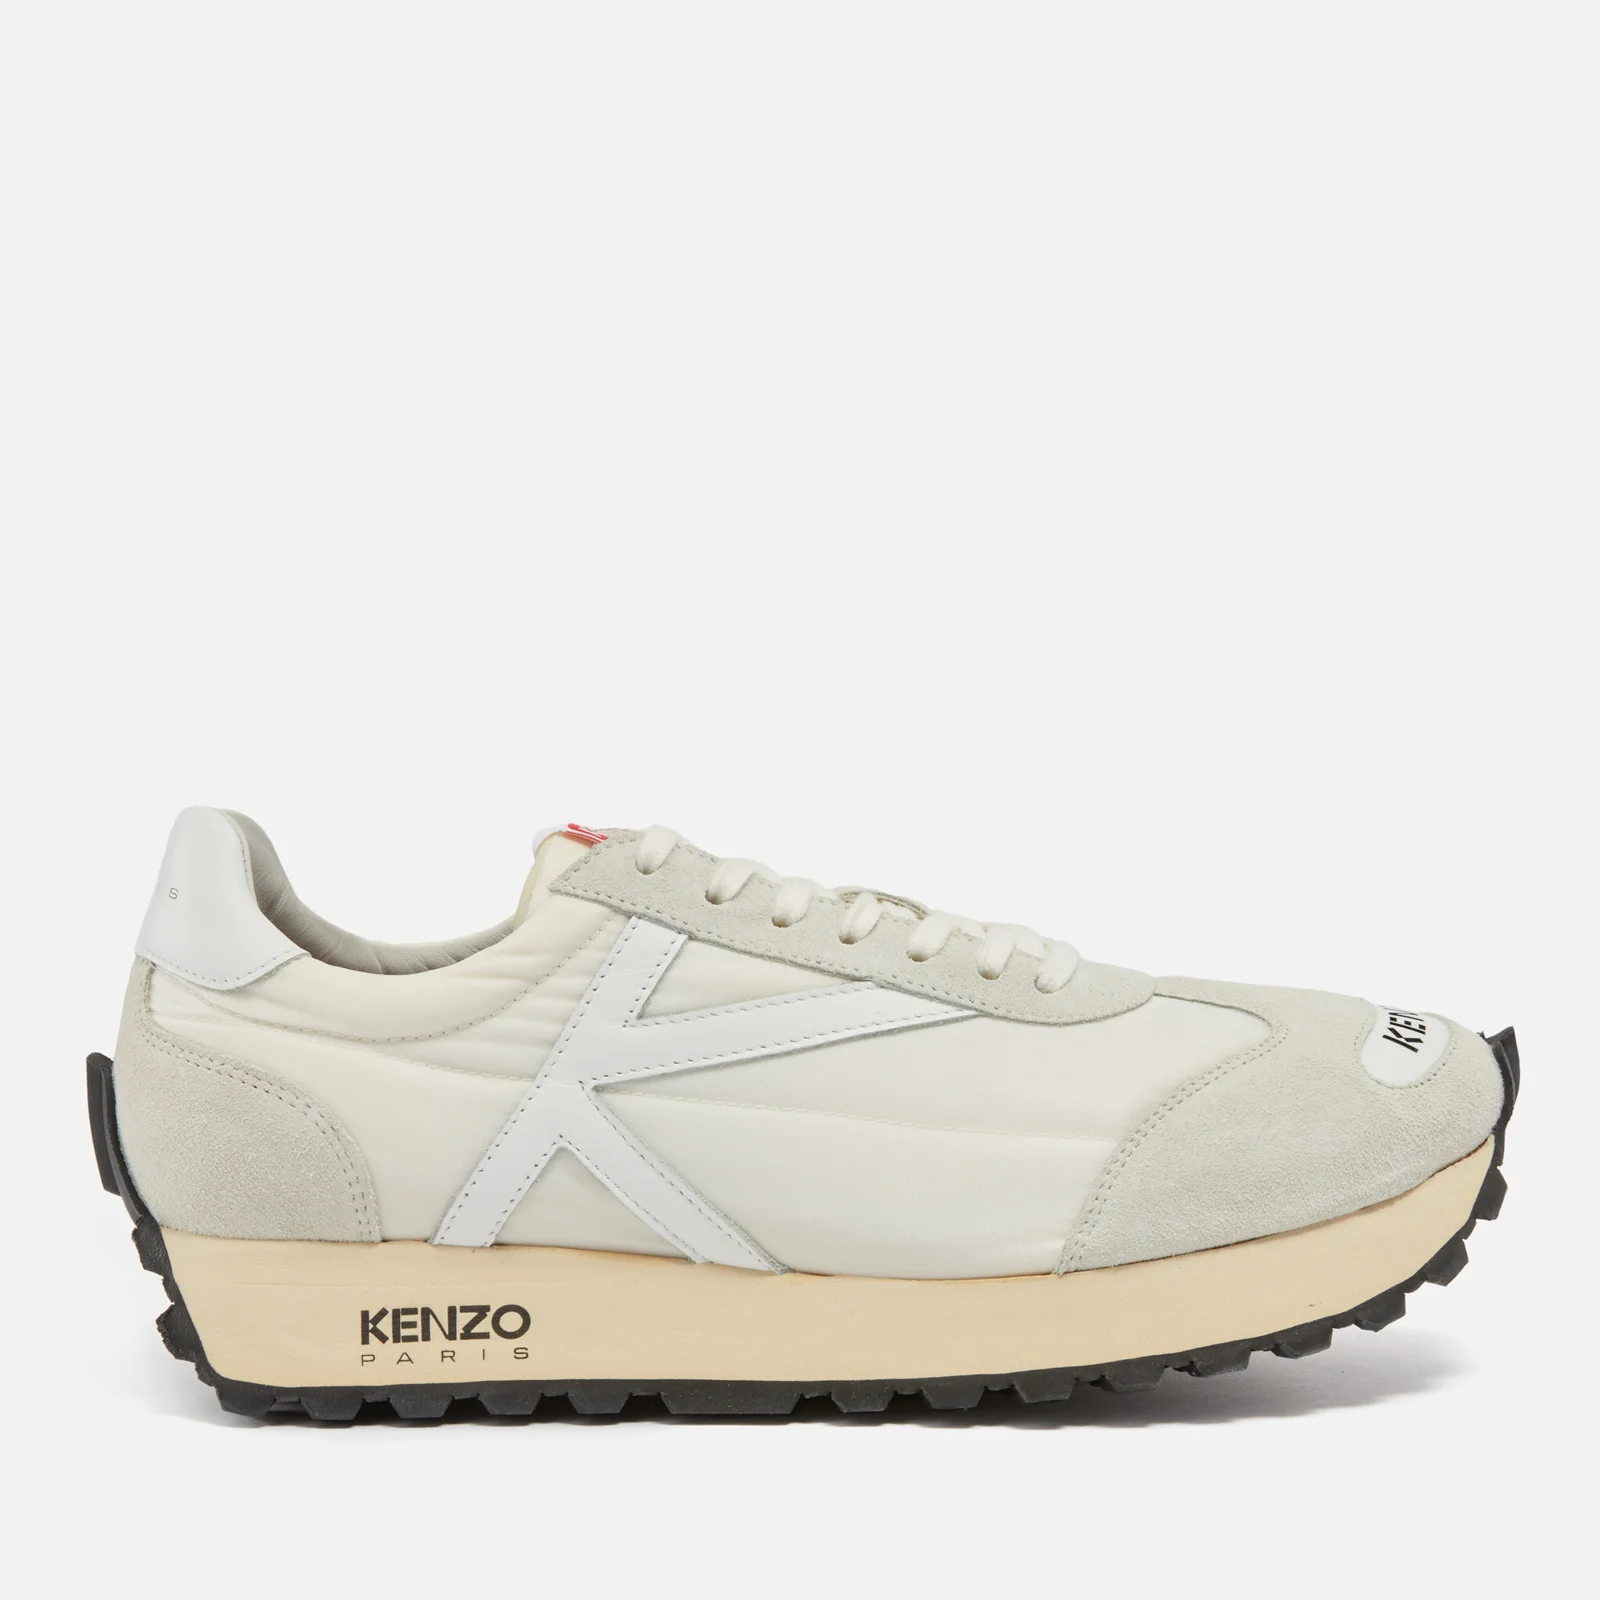 KENZO Women's Smile Nylon, Suede and Leather Trainers Image 1